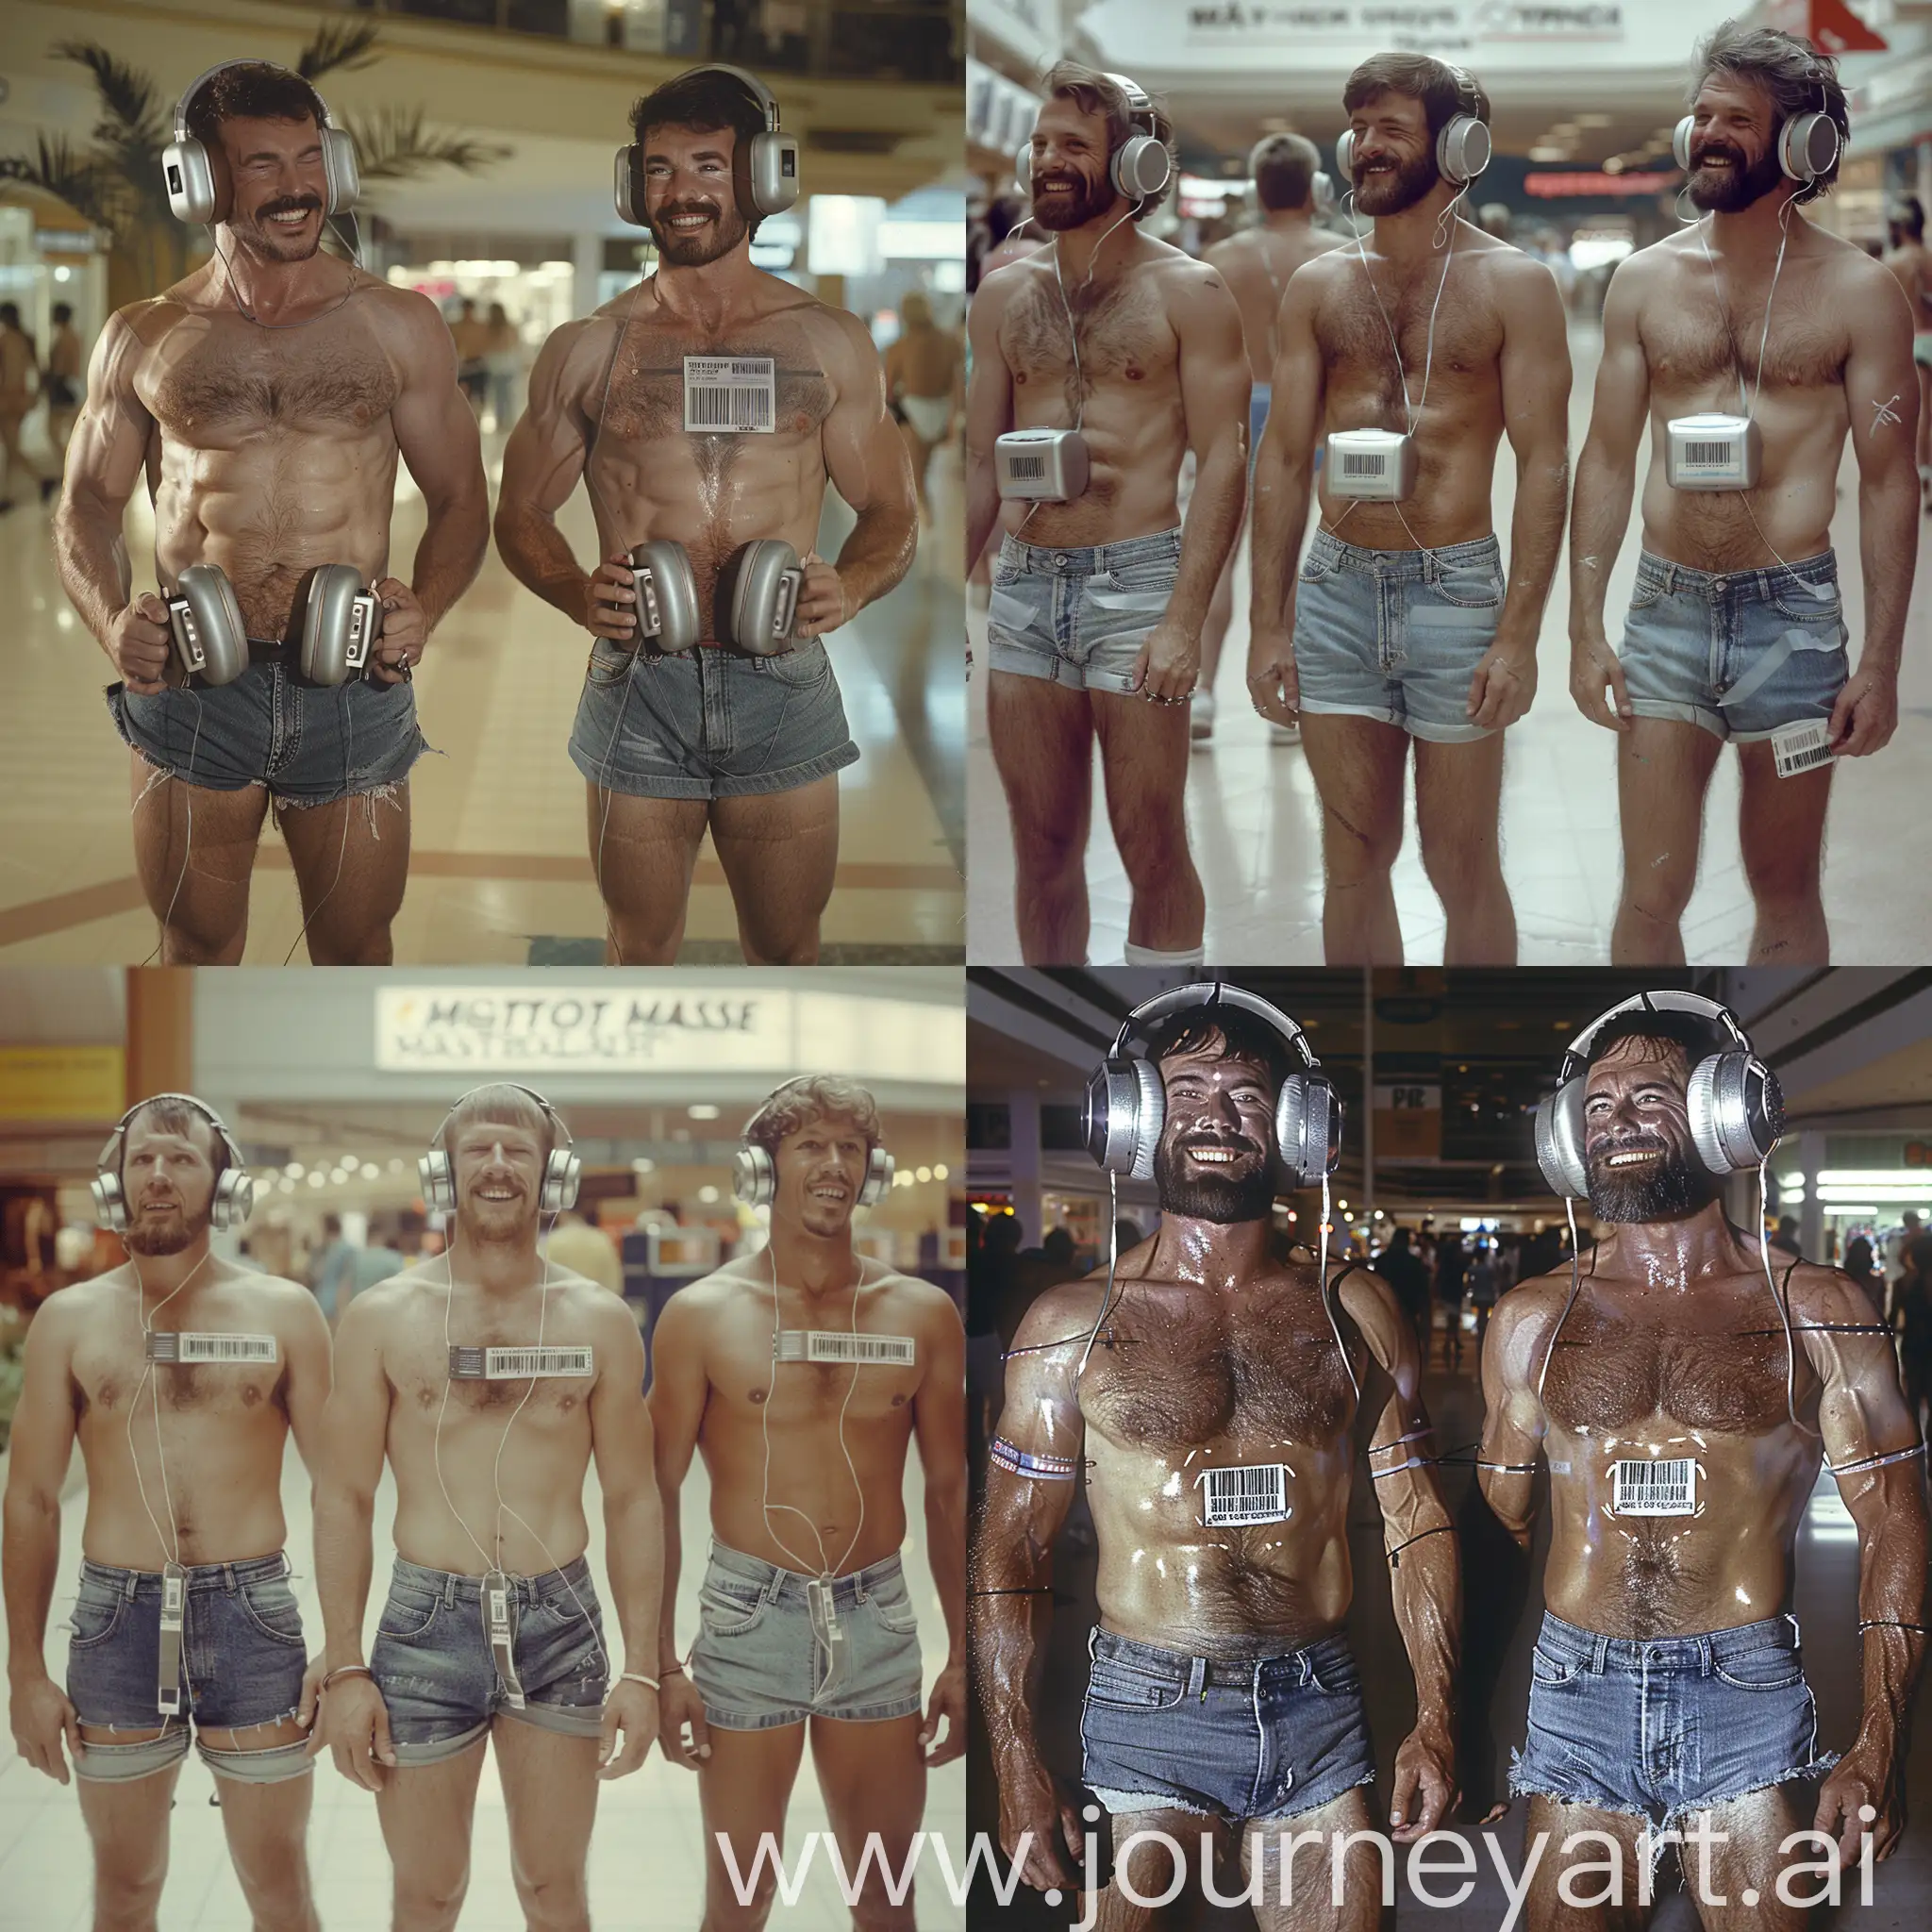 Handsome muscular middle-aged men each wear silver headphones and fitted cutoff denim shorts, dazed smiles, small barcode attached to each man's chest, 1980s shopping mall setting, facial hair, facing the viewer, mass indoctrination, color image, hyperrealistic, cinematic
